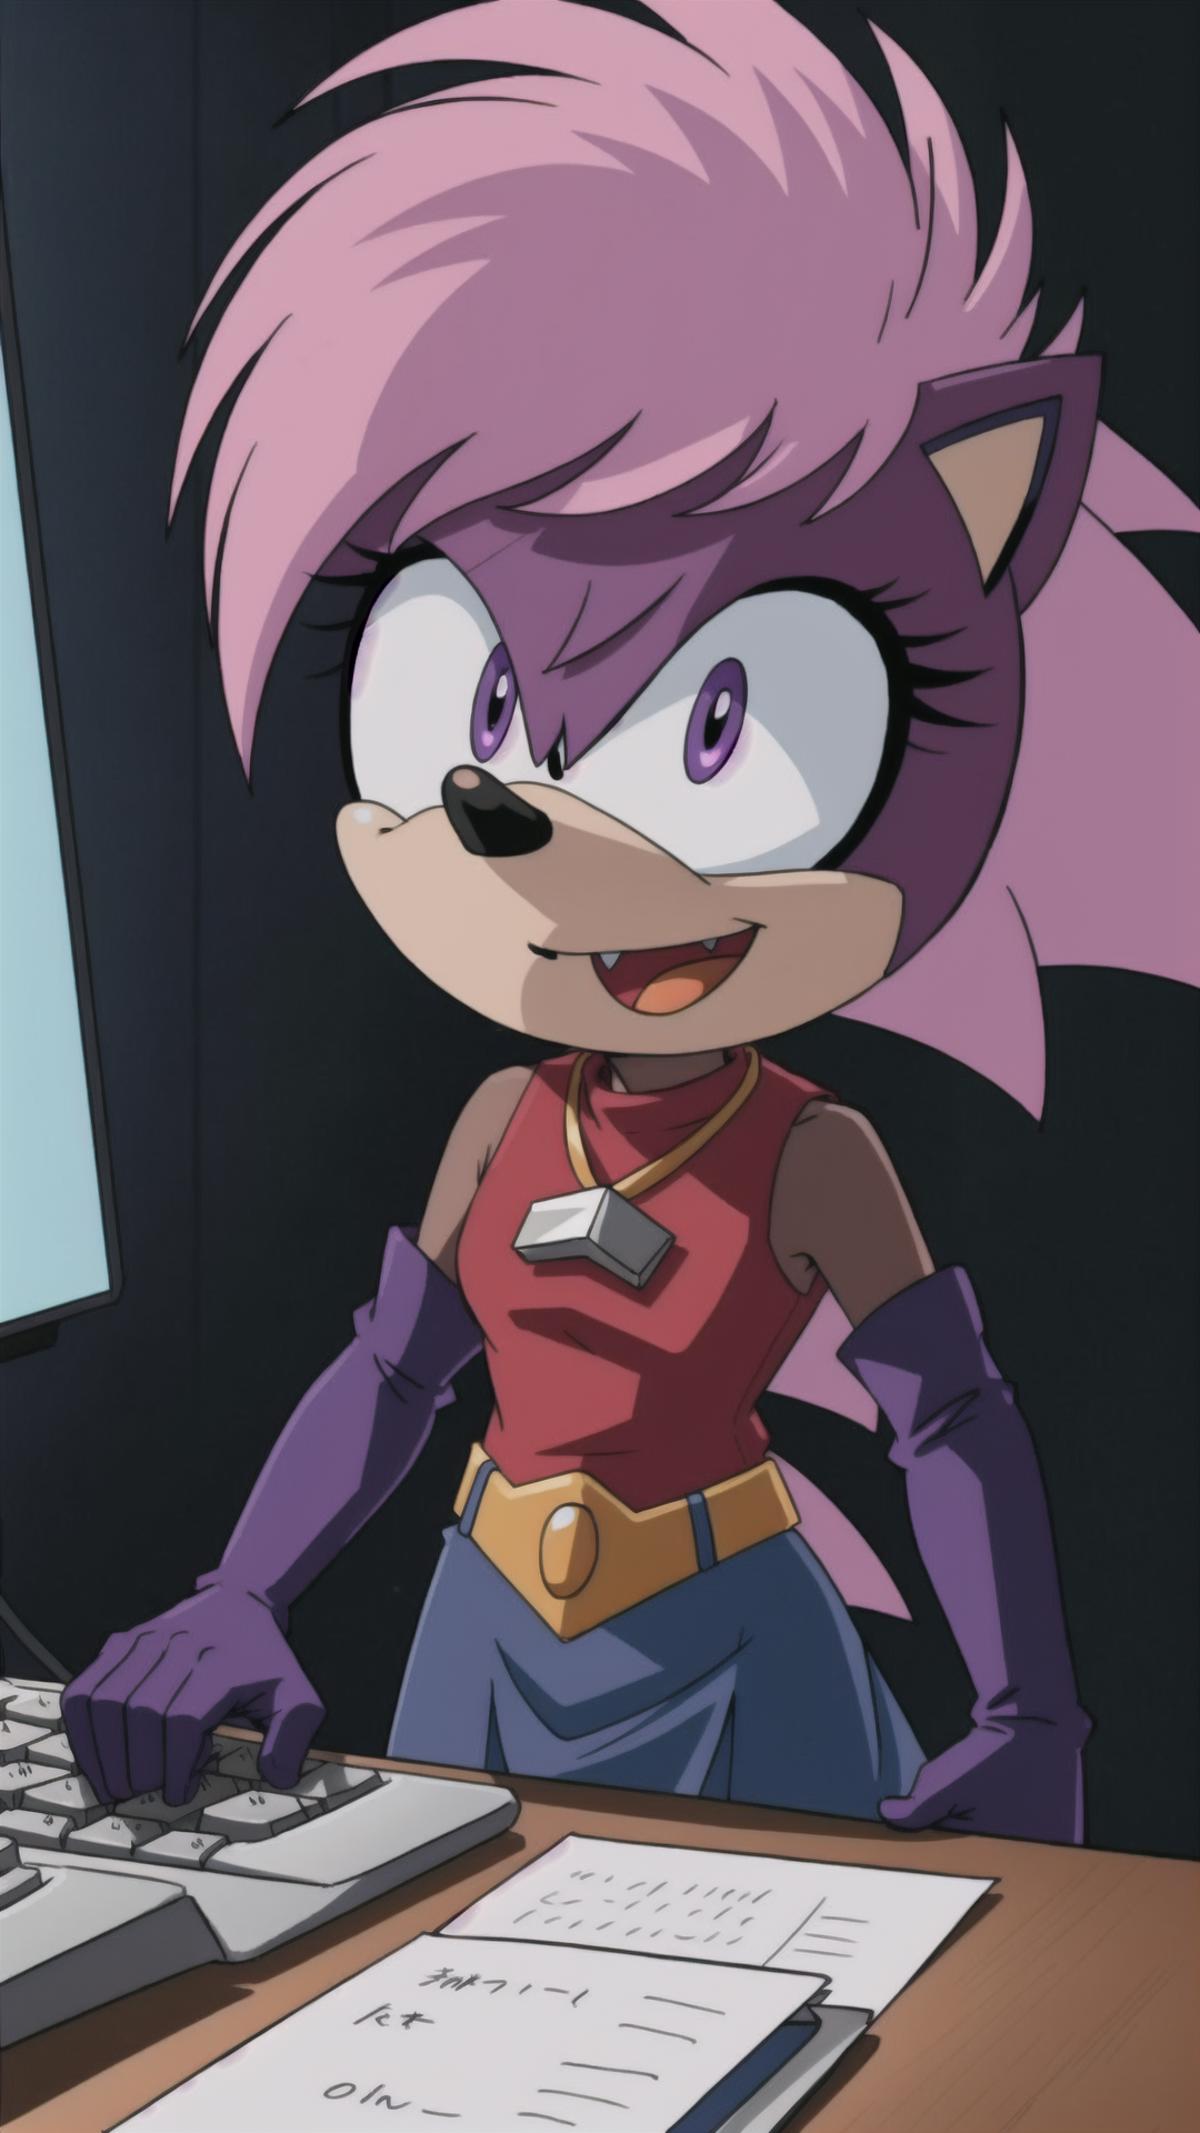 Sonia The Hedgehog (Sonic Underground) - Commision image by HC94